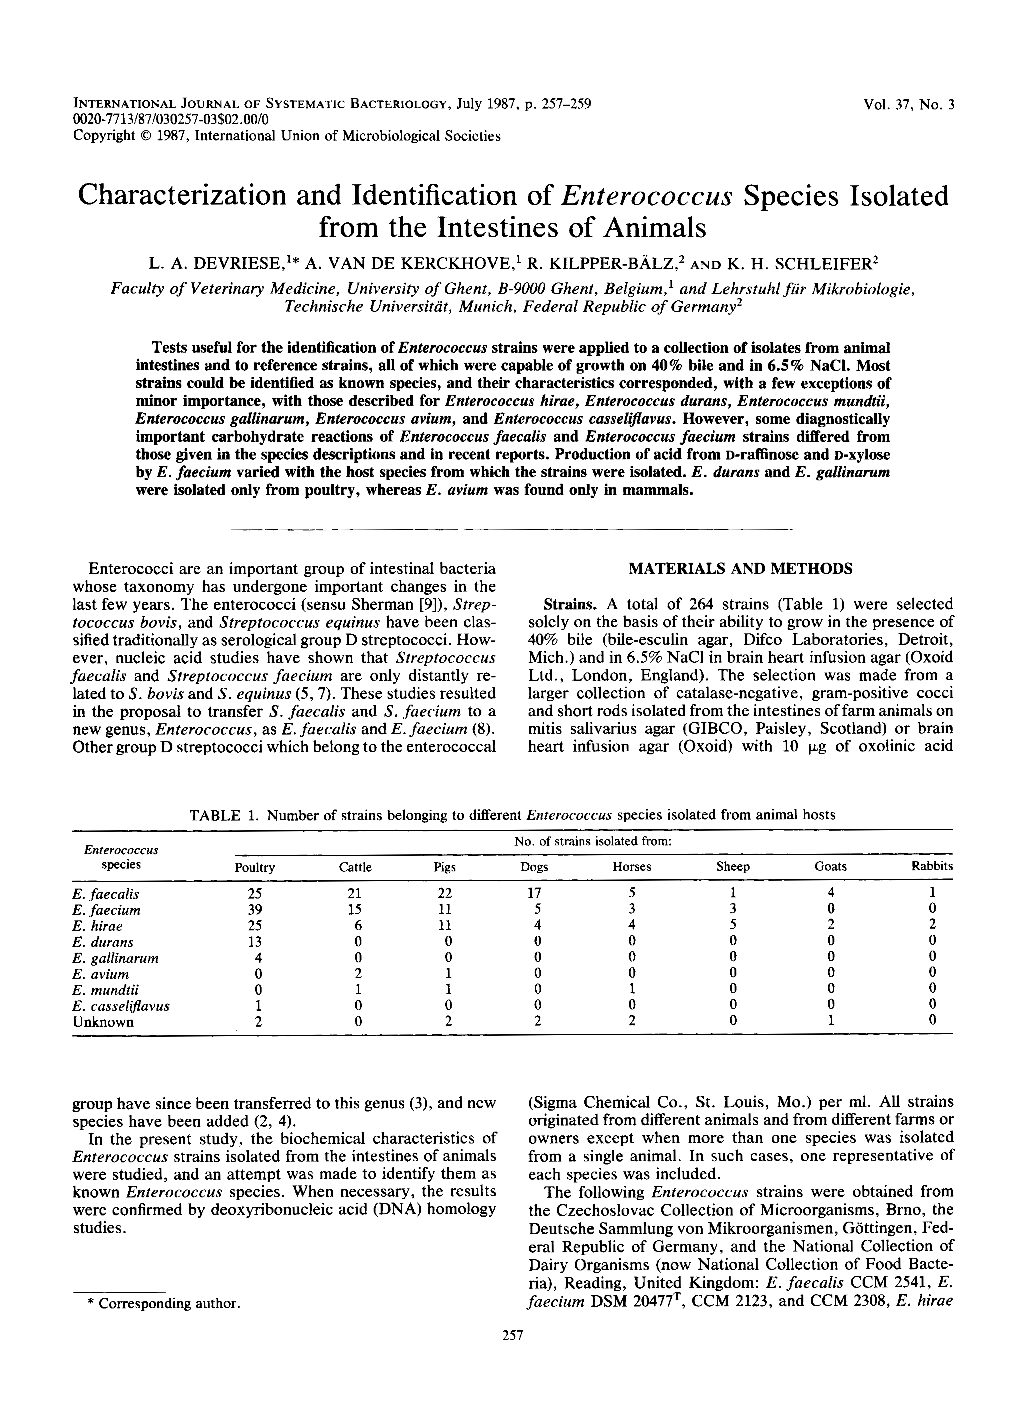 Characterization and Identification of Enterococcus Species Isolated from the Intestines of Animals L